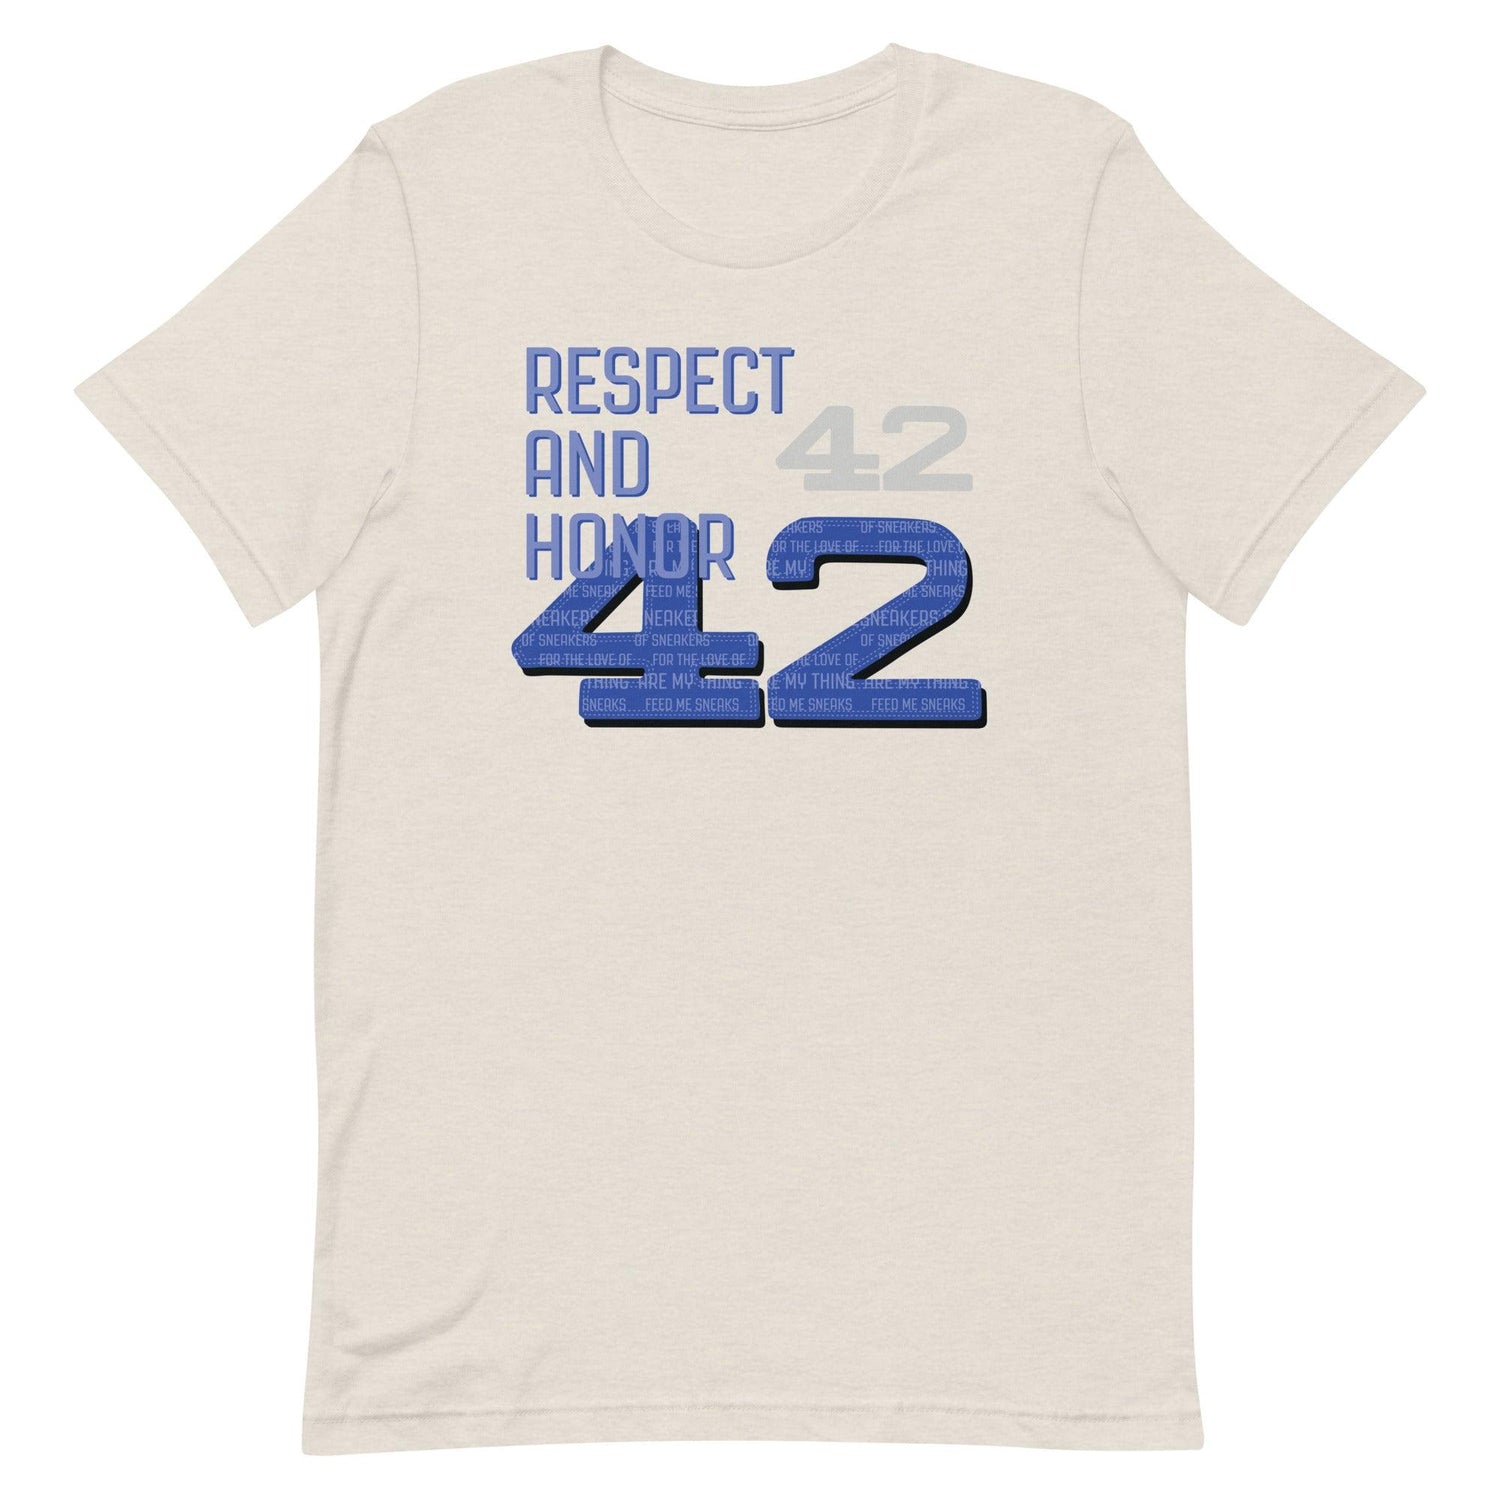 Respect Shirt To Match Nike Dunk Low Jackie Robinson - SNKADX